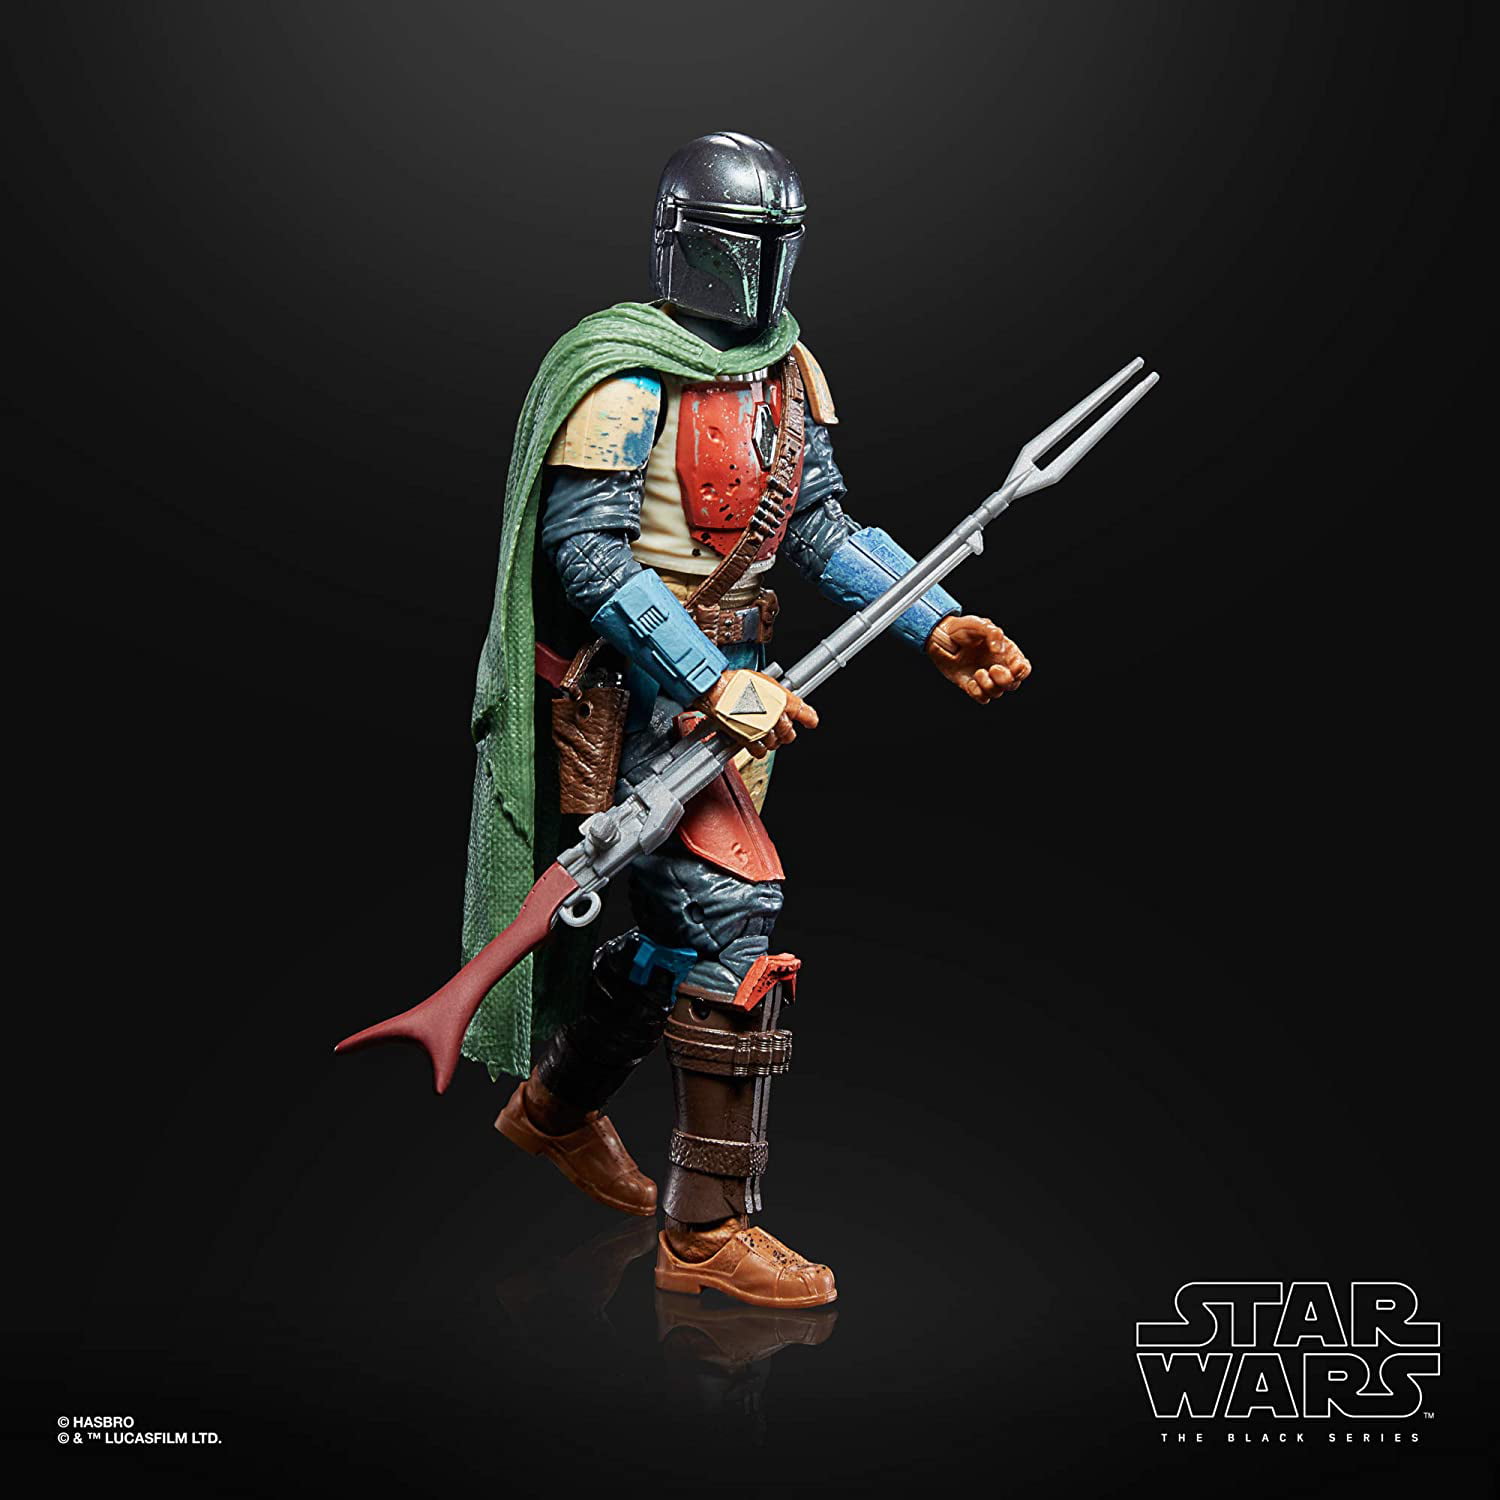 The Mandalorian Star Wars The Black Series Credit Collection Toy 6 Inch 